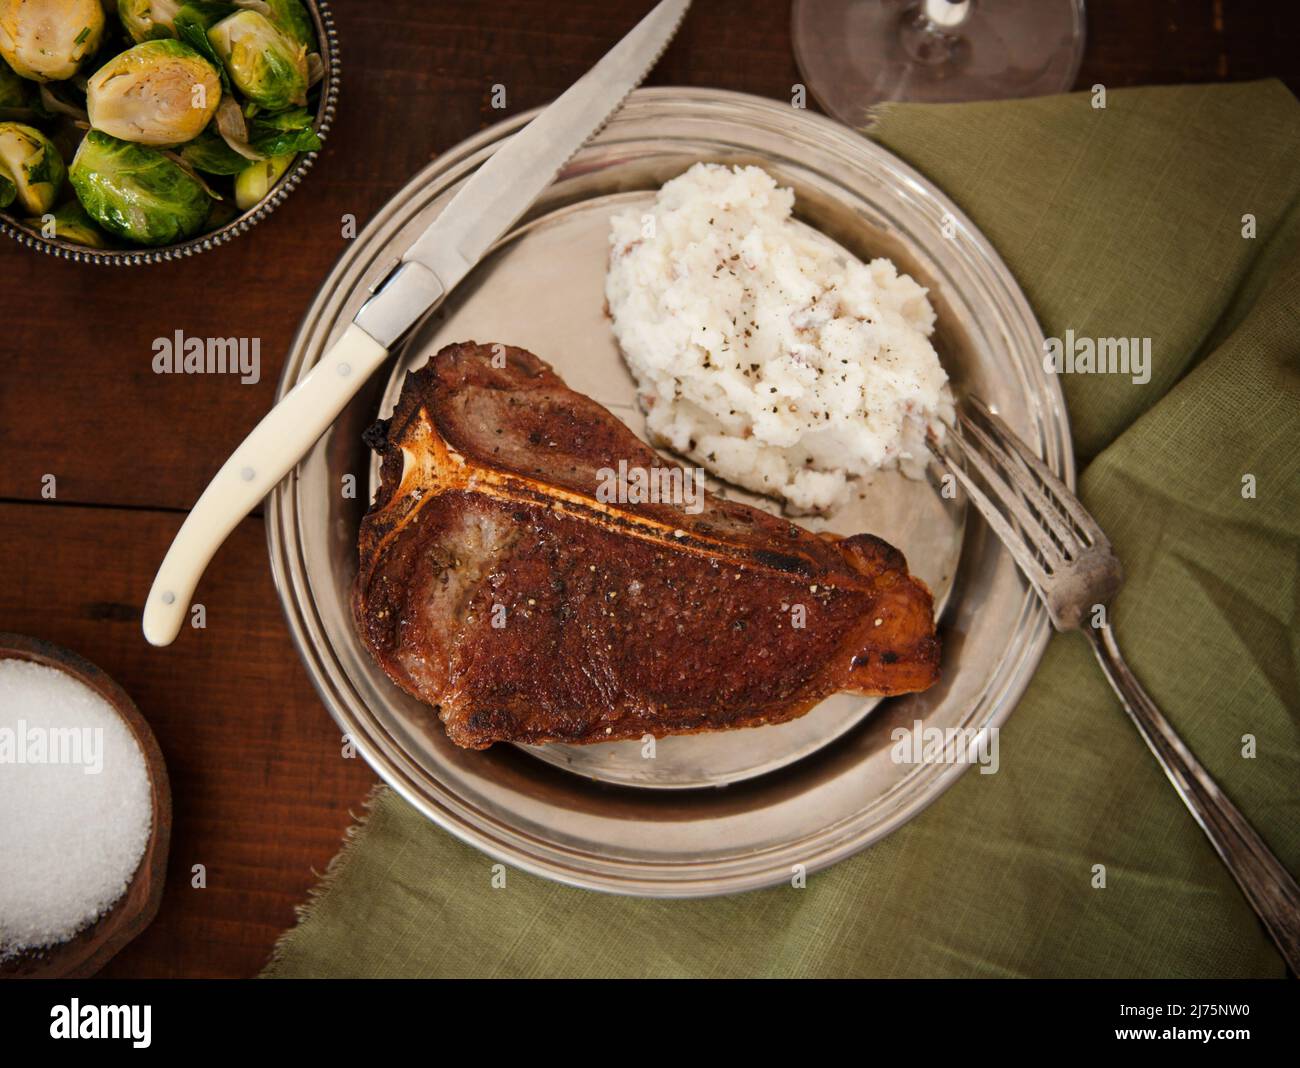 Whole Steak with Mashed Potatoes with a Side of Brussels Sprouts Stock Photo